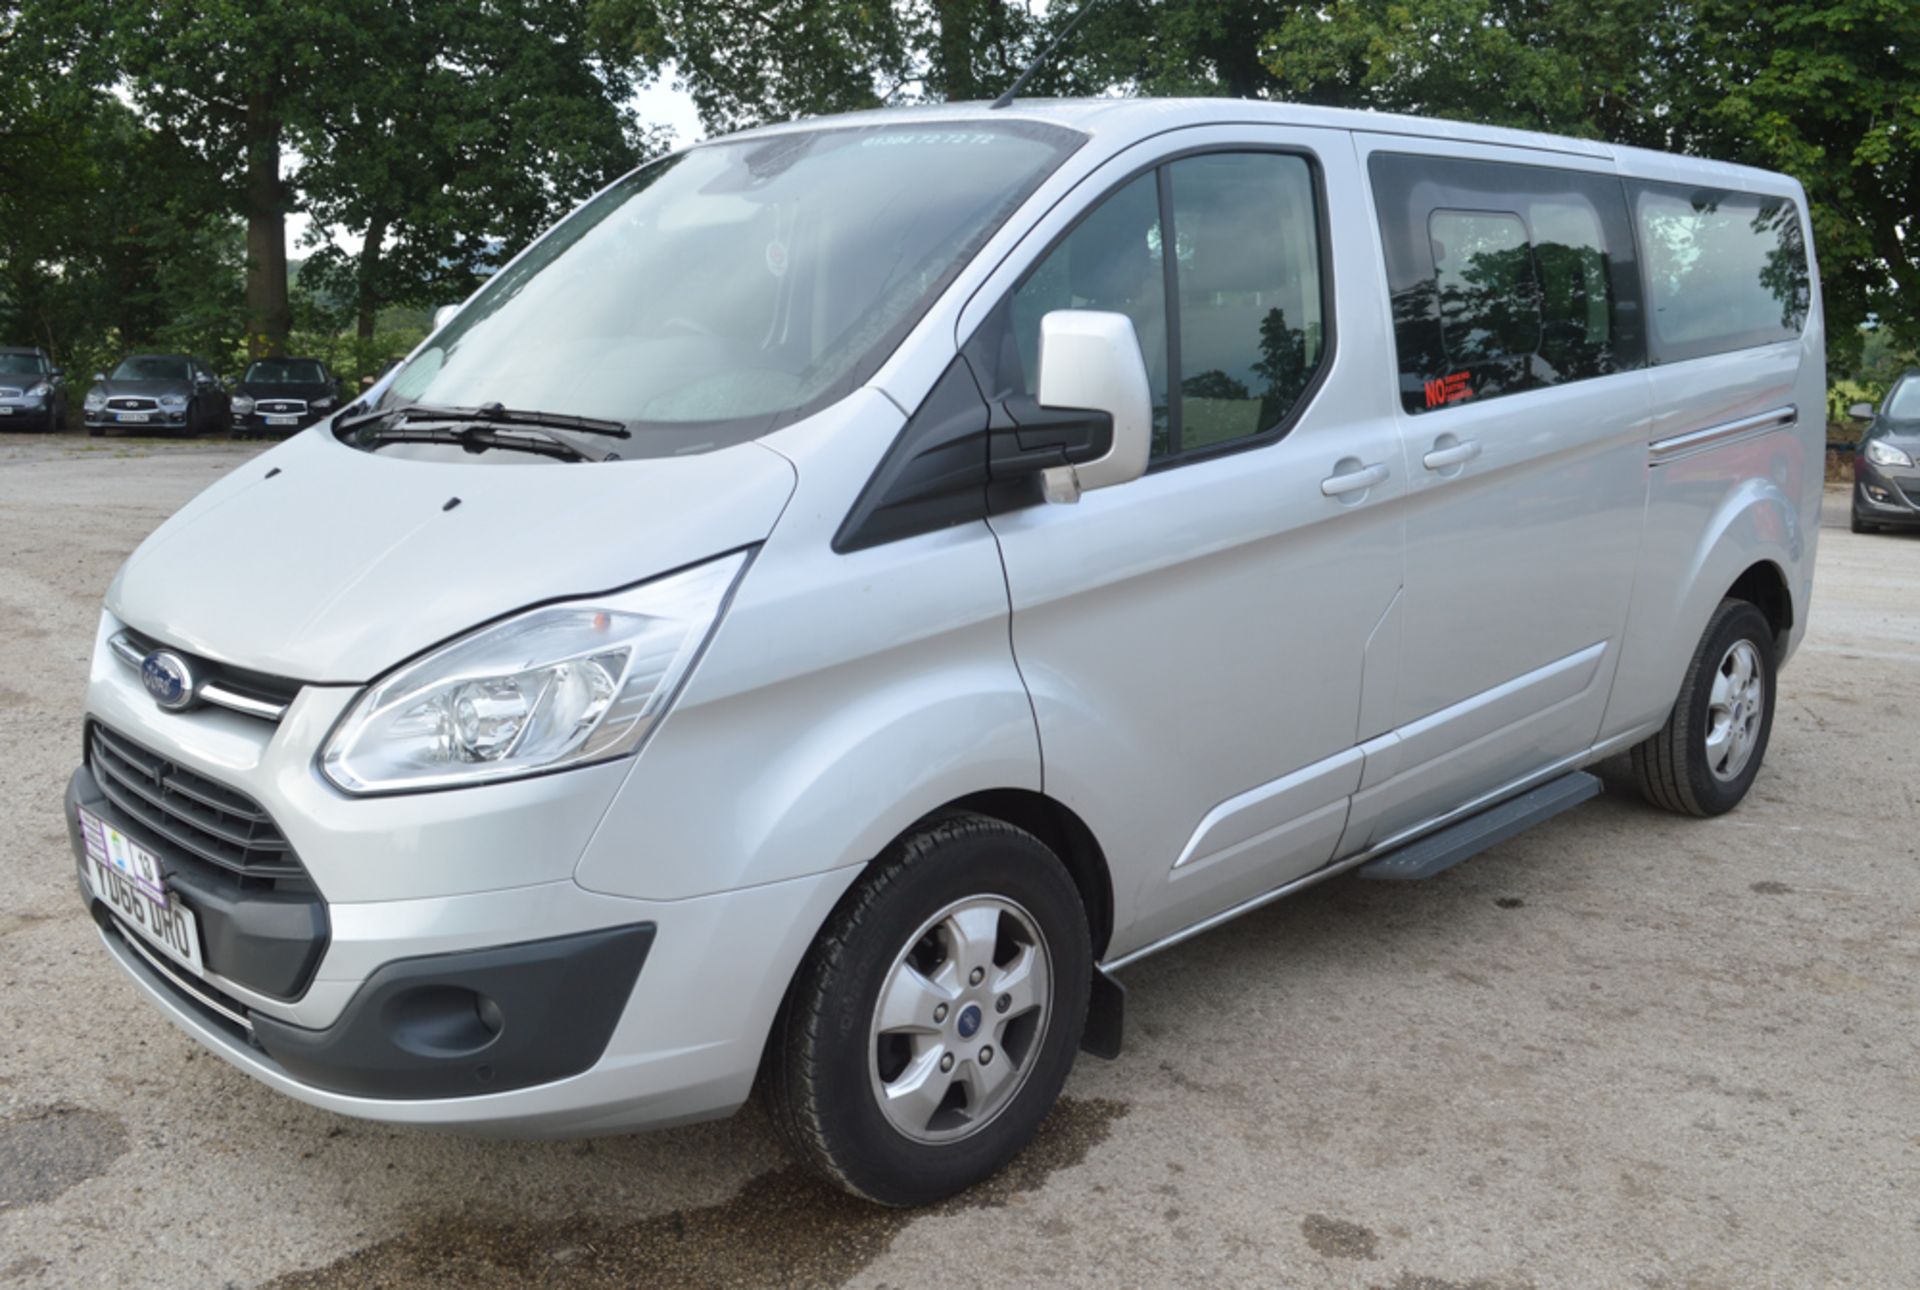 Ford Tourneo Custom 8 seat minibus  Registration Number: YD66 DRO  Date of Registration: 01/09/ - Image 4 of 15